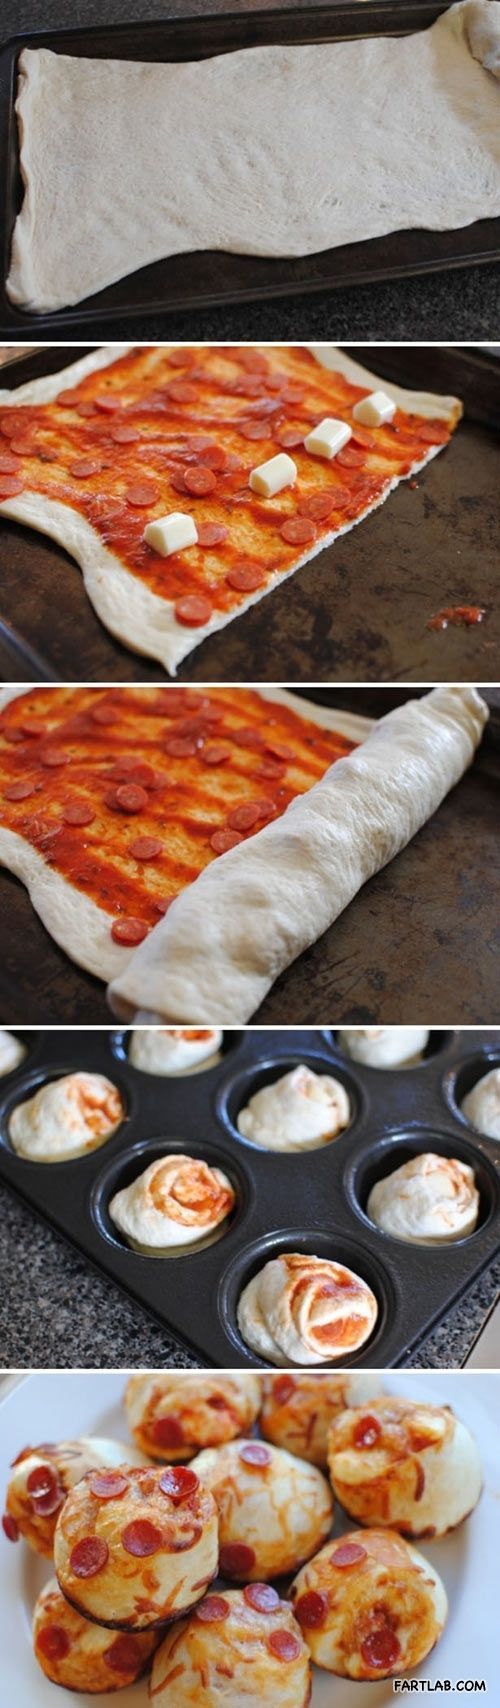 recipes for Amazing pizza r